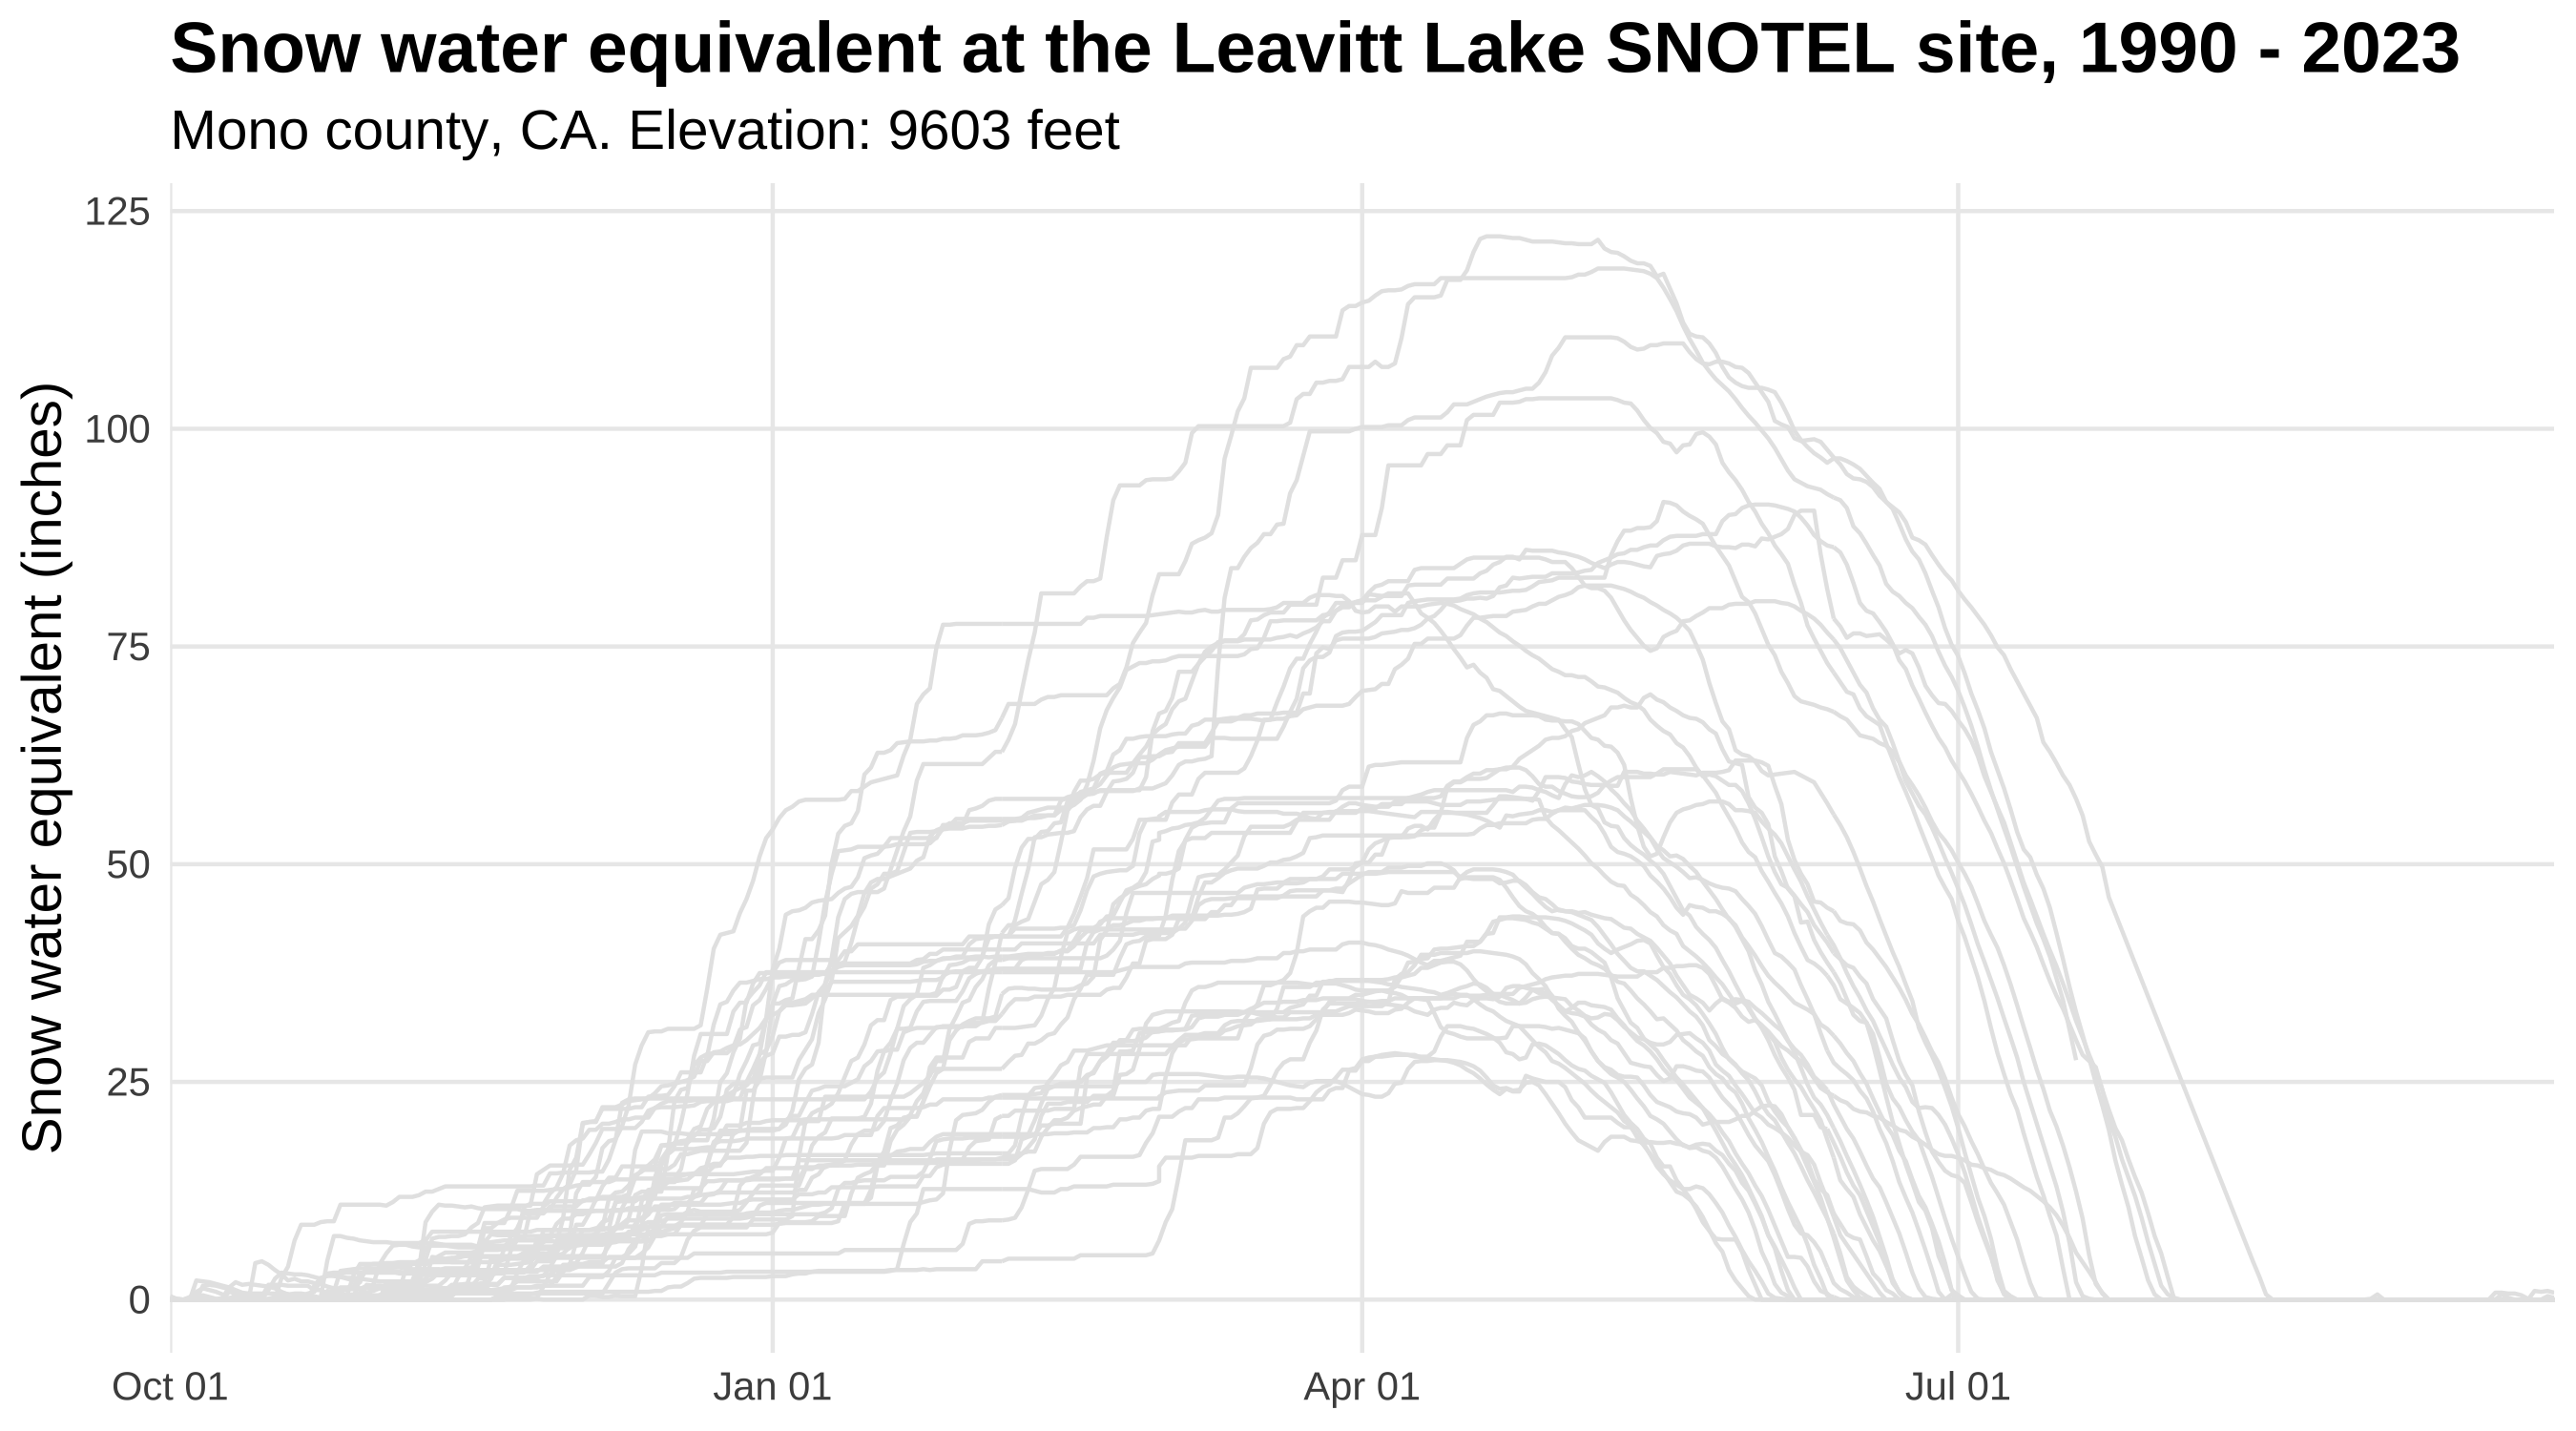 An animated line graph of 2023 snow water equivalent (SWE) at the Leavitt Lake SNOTEL site in Mono County, California, Elevation: 9603 feet. Blue line is animated showing 2023 SWE from October 1 to September 31 with stagnant grey lines indicating SWE from 1990-2023.